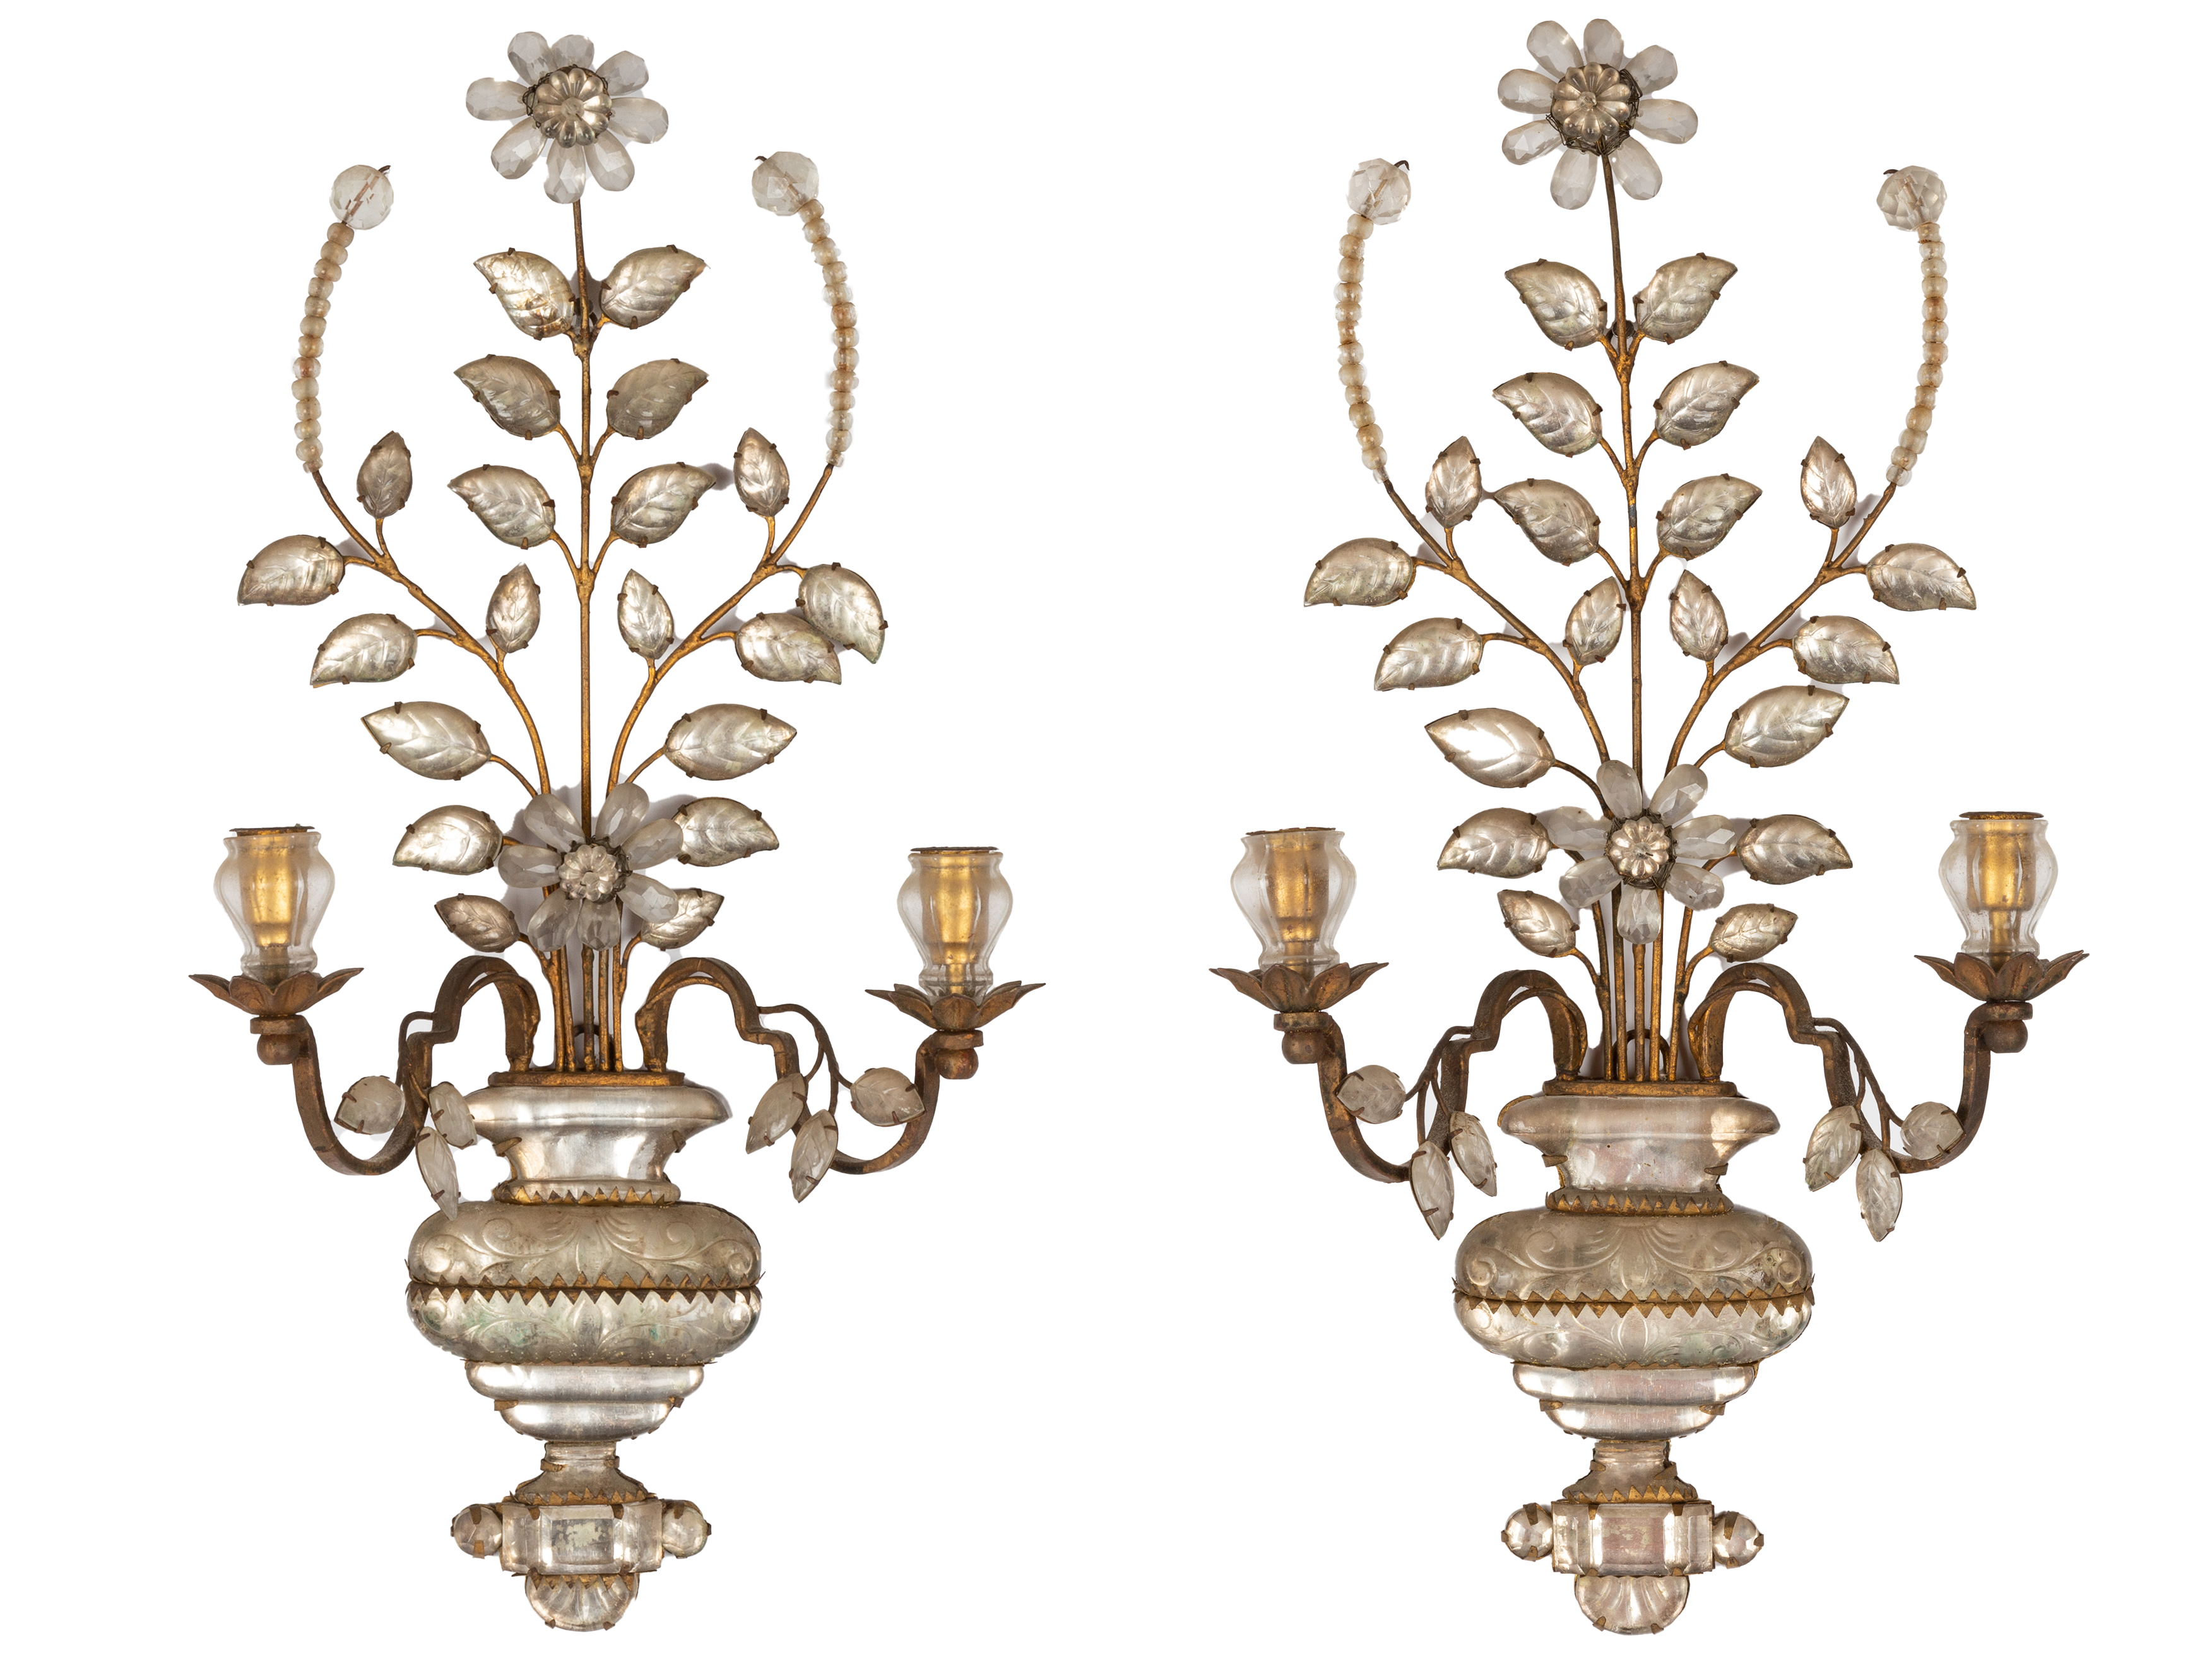 PAIR OF ROCCO ROCK CRYSTAL & GILT